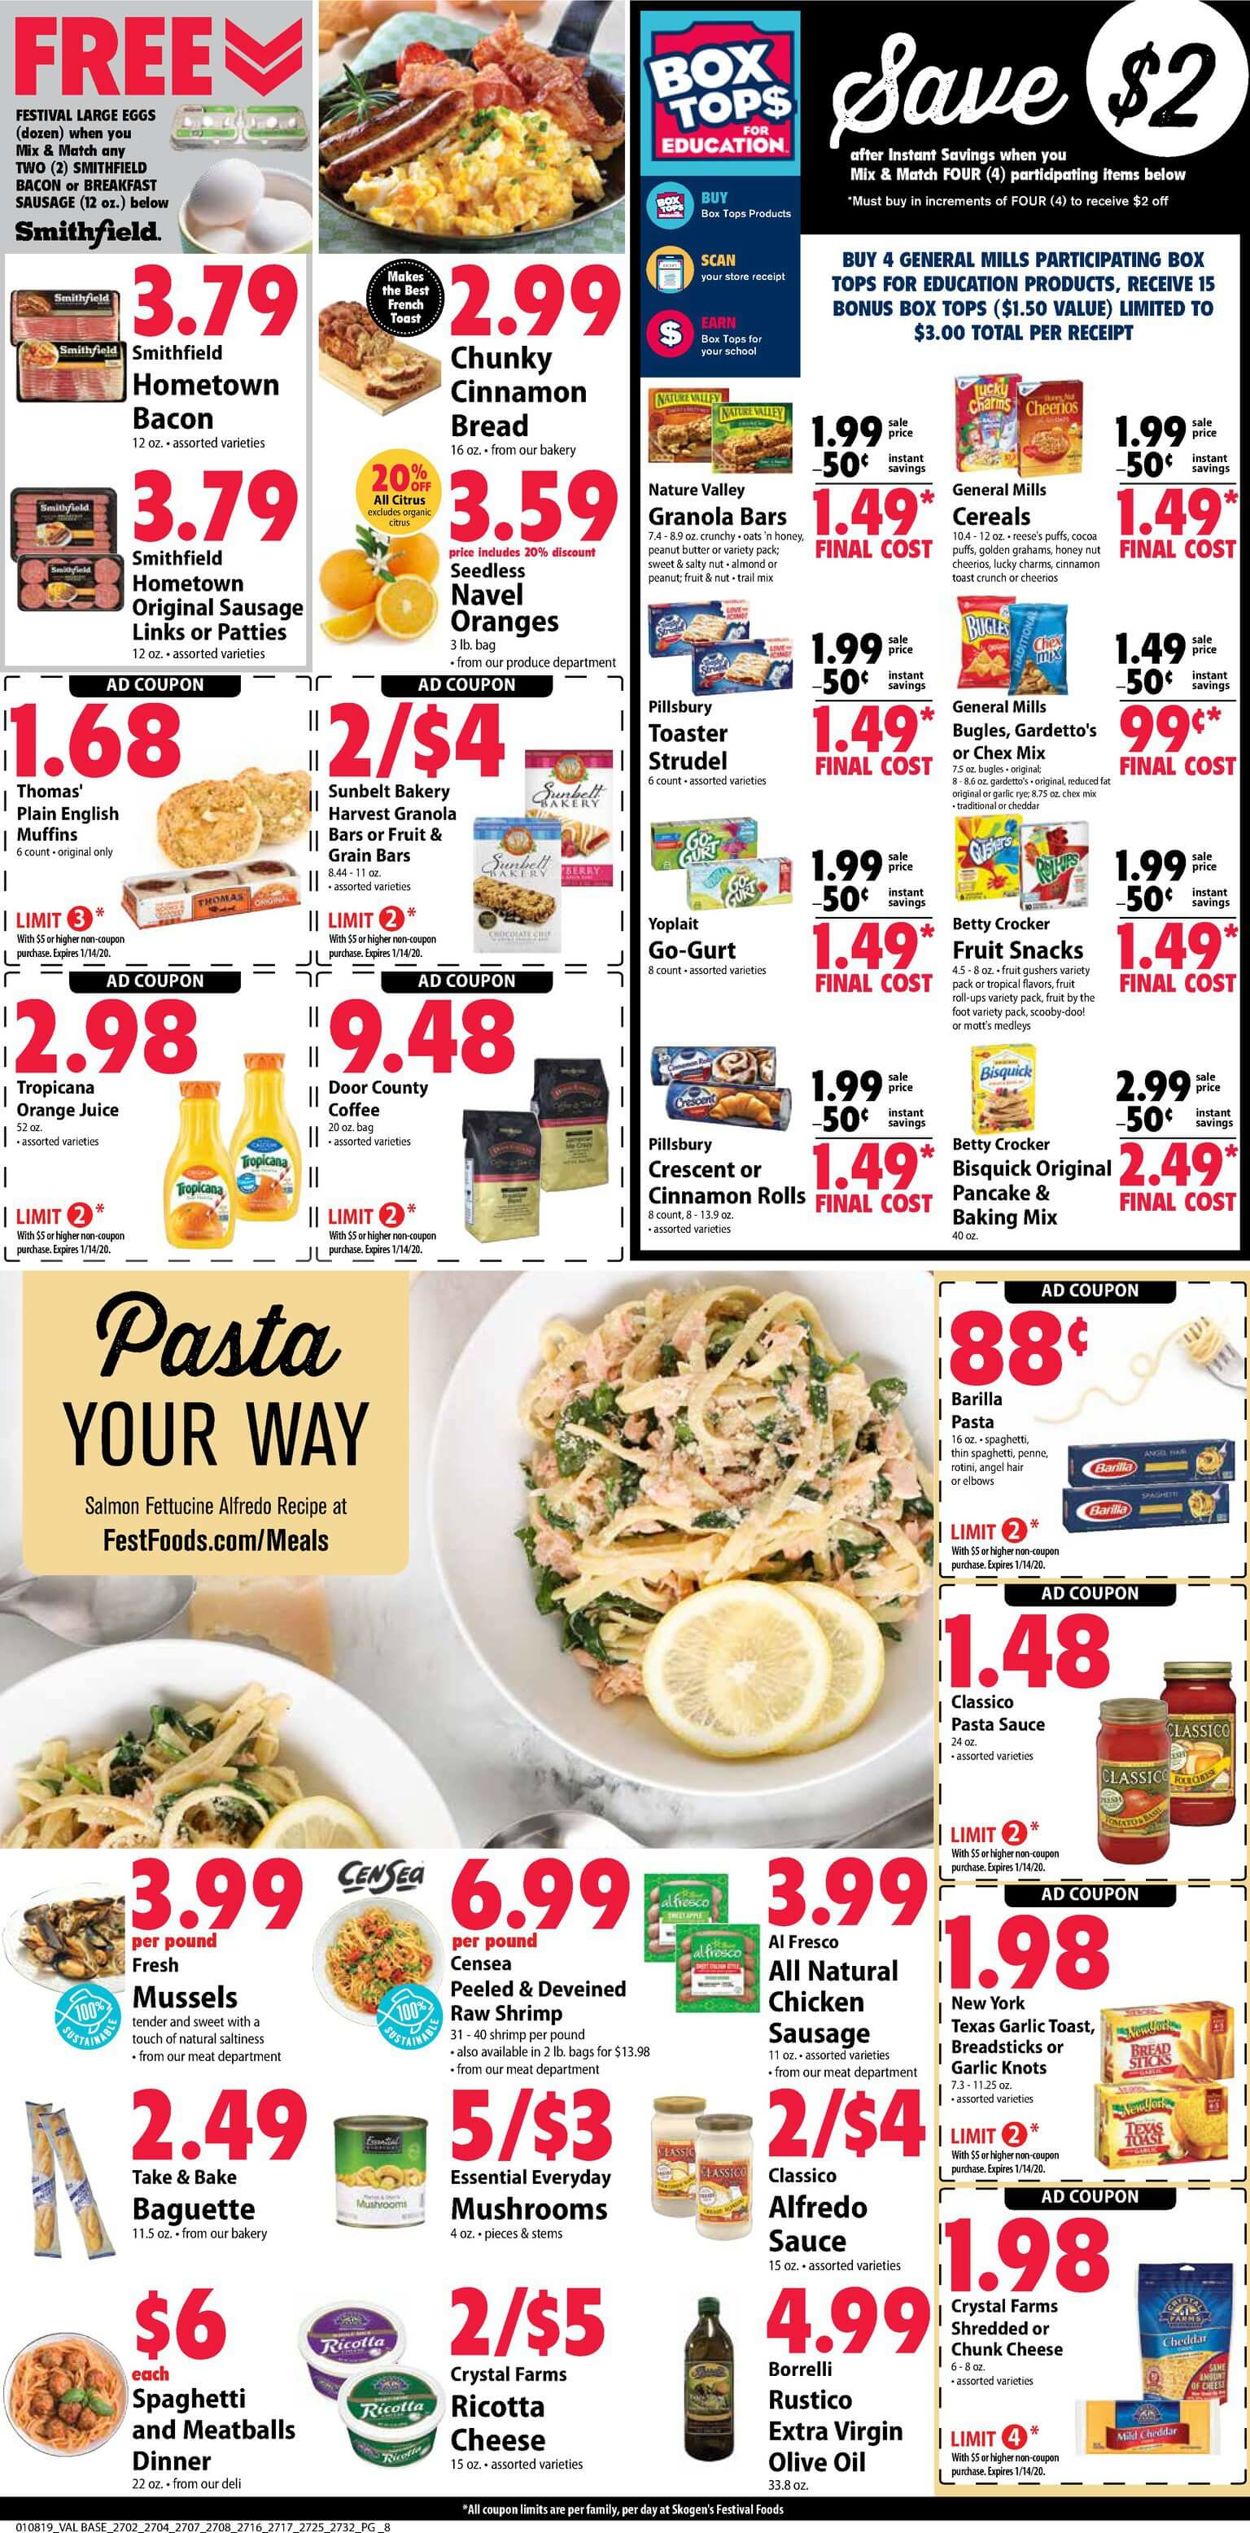 Festival Foods Current weekly ad 01/08 01/14/2020 [8]